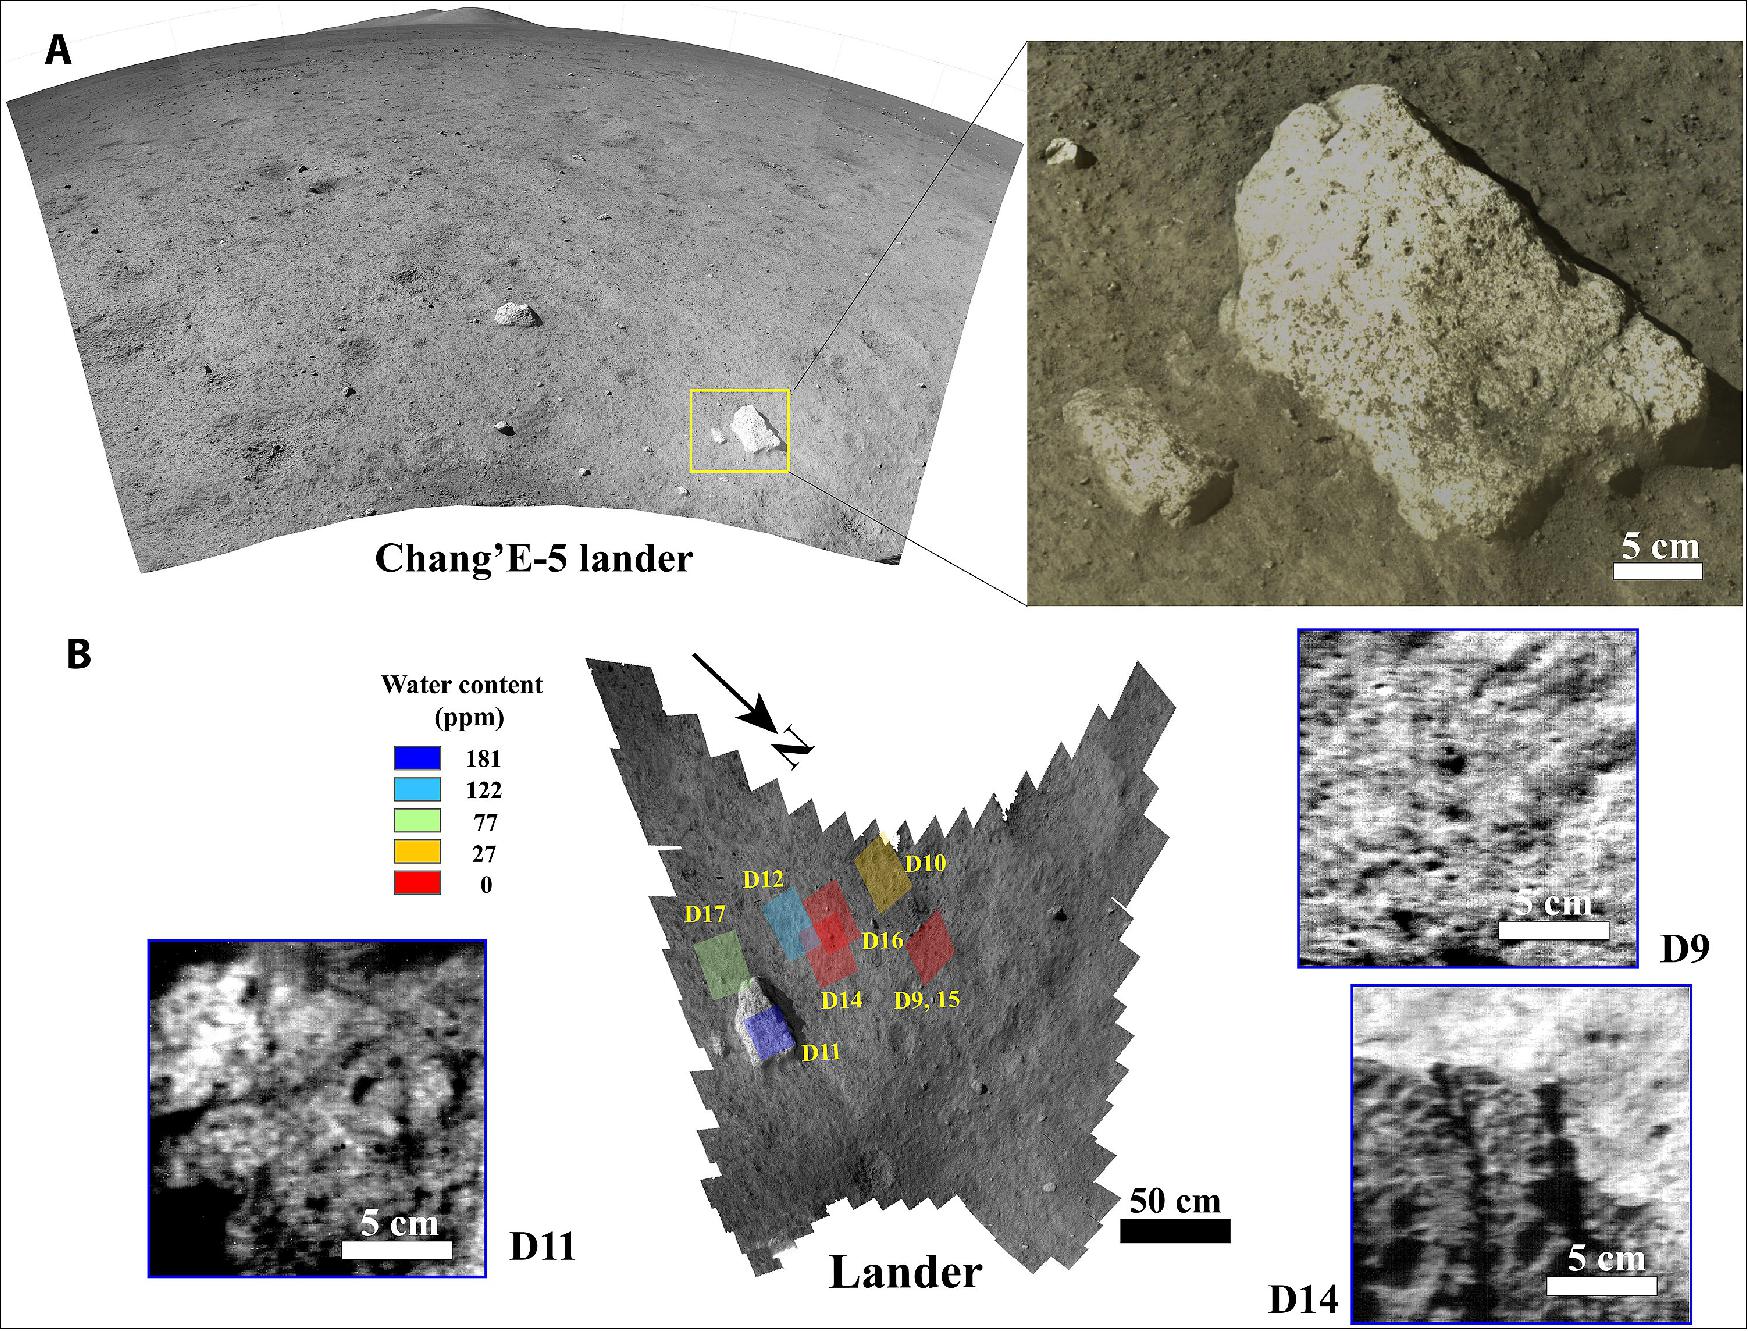 Figure 14: The context images at the Chang’E-5 landing site captured by the PCAM and LMS. (A) The PCAM image of the sampling site. The right panel shows the enlarged image of the rock from which the reflectance spectra were collected by the LMS. (B) The image (0.4 to 1.0 mm per pixel) at 900 nm acquired by the multispectral mode of the LMS at the sampling site. The colored rectangles represent the exact spots on the surface where the hyperspectral data from 0.48 to 3.2 µm were acquired. The viewing geometry of each observation is shown in table S1. LMS hyperspectral mode images (~0.6 mm per pixel) at D9, D11, and D14 are shown as examples of the regolith textures in the LMS FOV. Similar texture images at other spots can be found in fig. S2. The water contents of each spot are estimated from the absorption strength near 3 µm using the method in (9) after thermal removal with the model in (8), image credit: IGGCAS, LIN Honglei